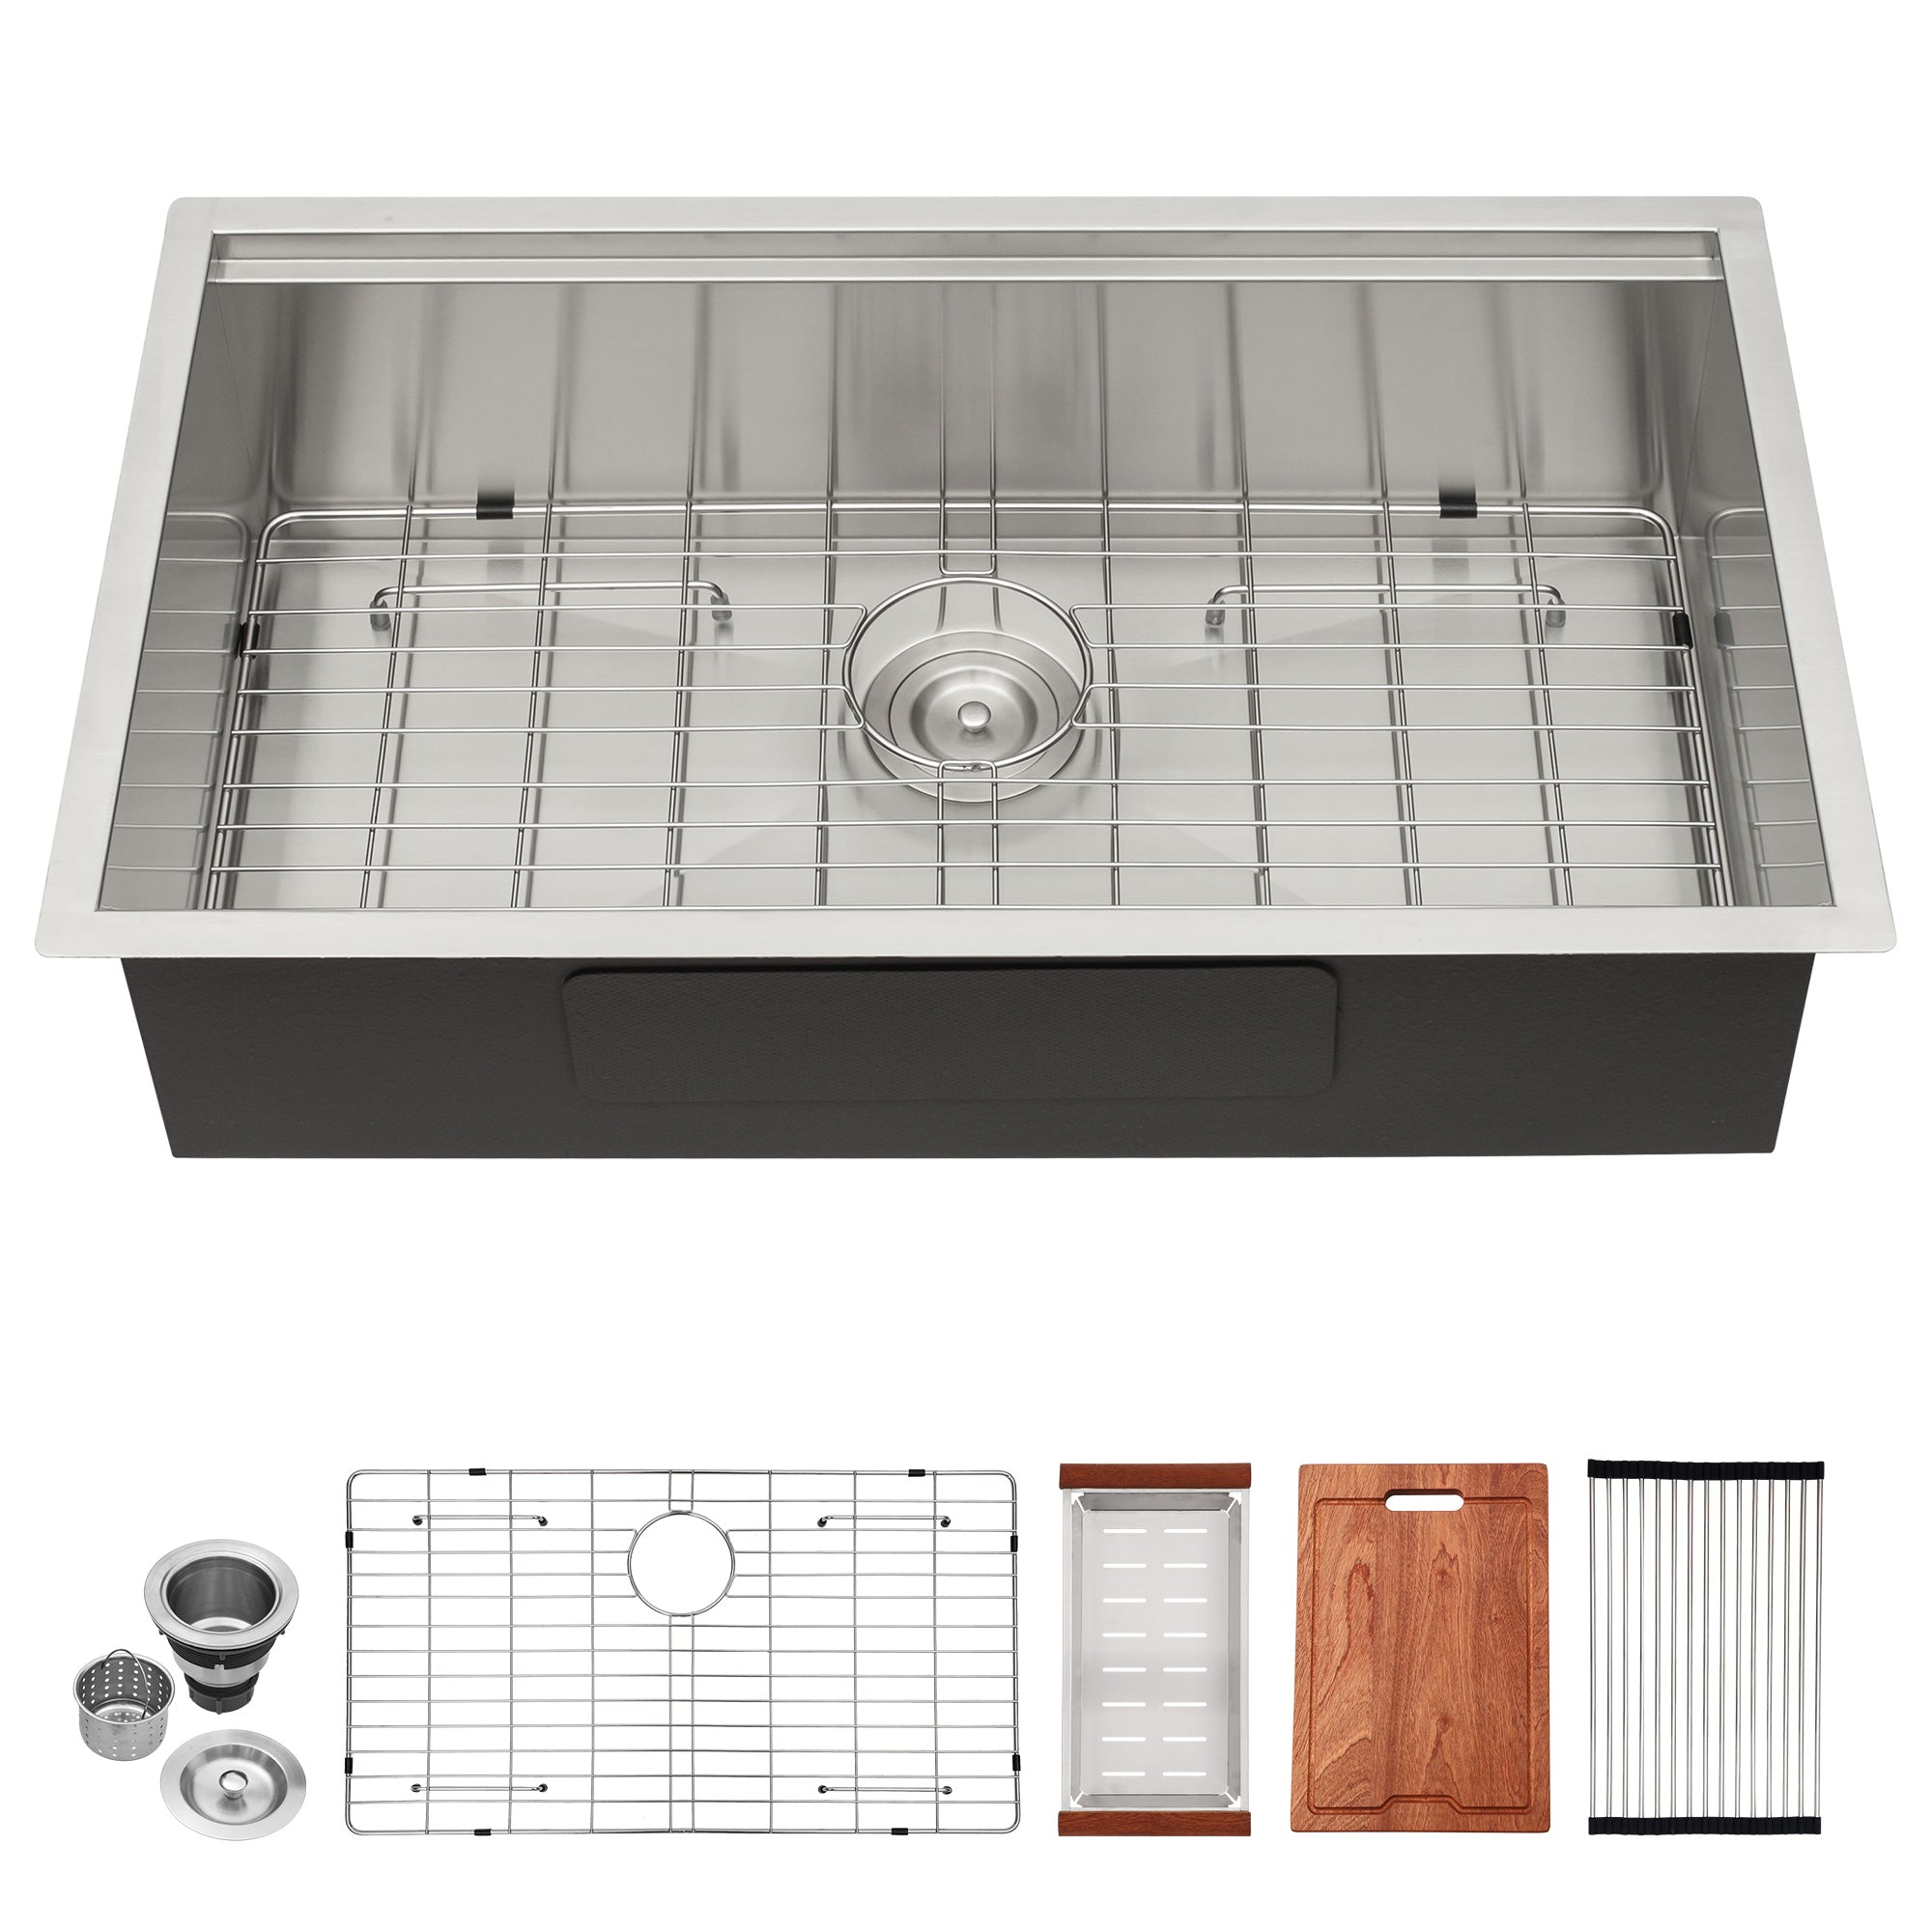 32 Inch Undermount Kitchen Sink Workstation Single Bowl Sink 16 Gauge Stainless Steel Sink with Cutting Board and Colander from Lordear